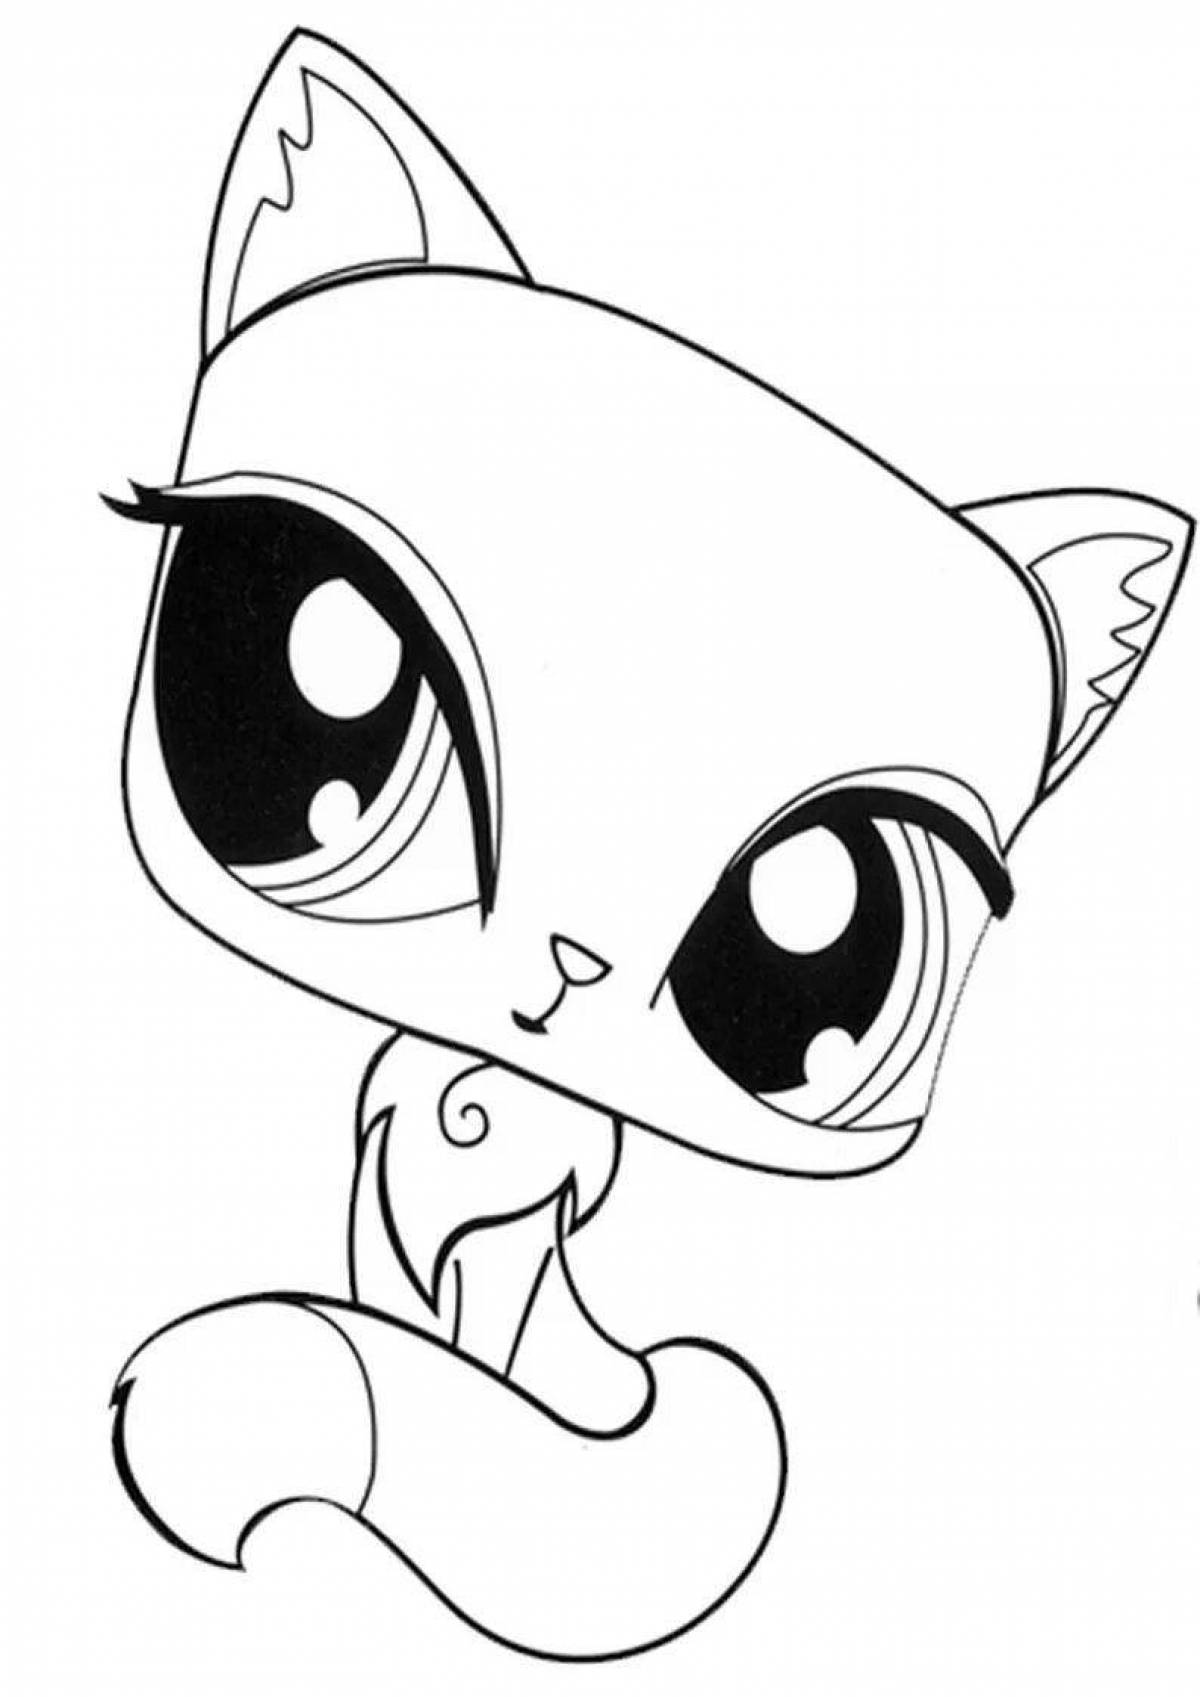 Lovely lps coloring page